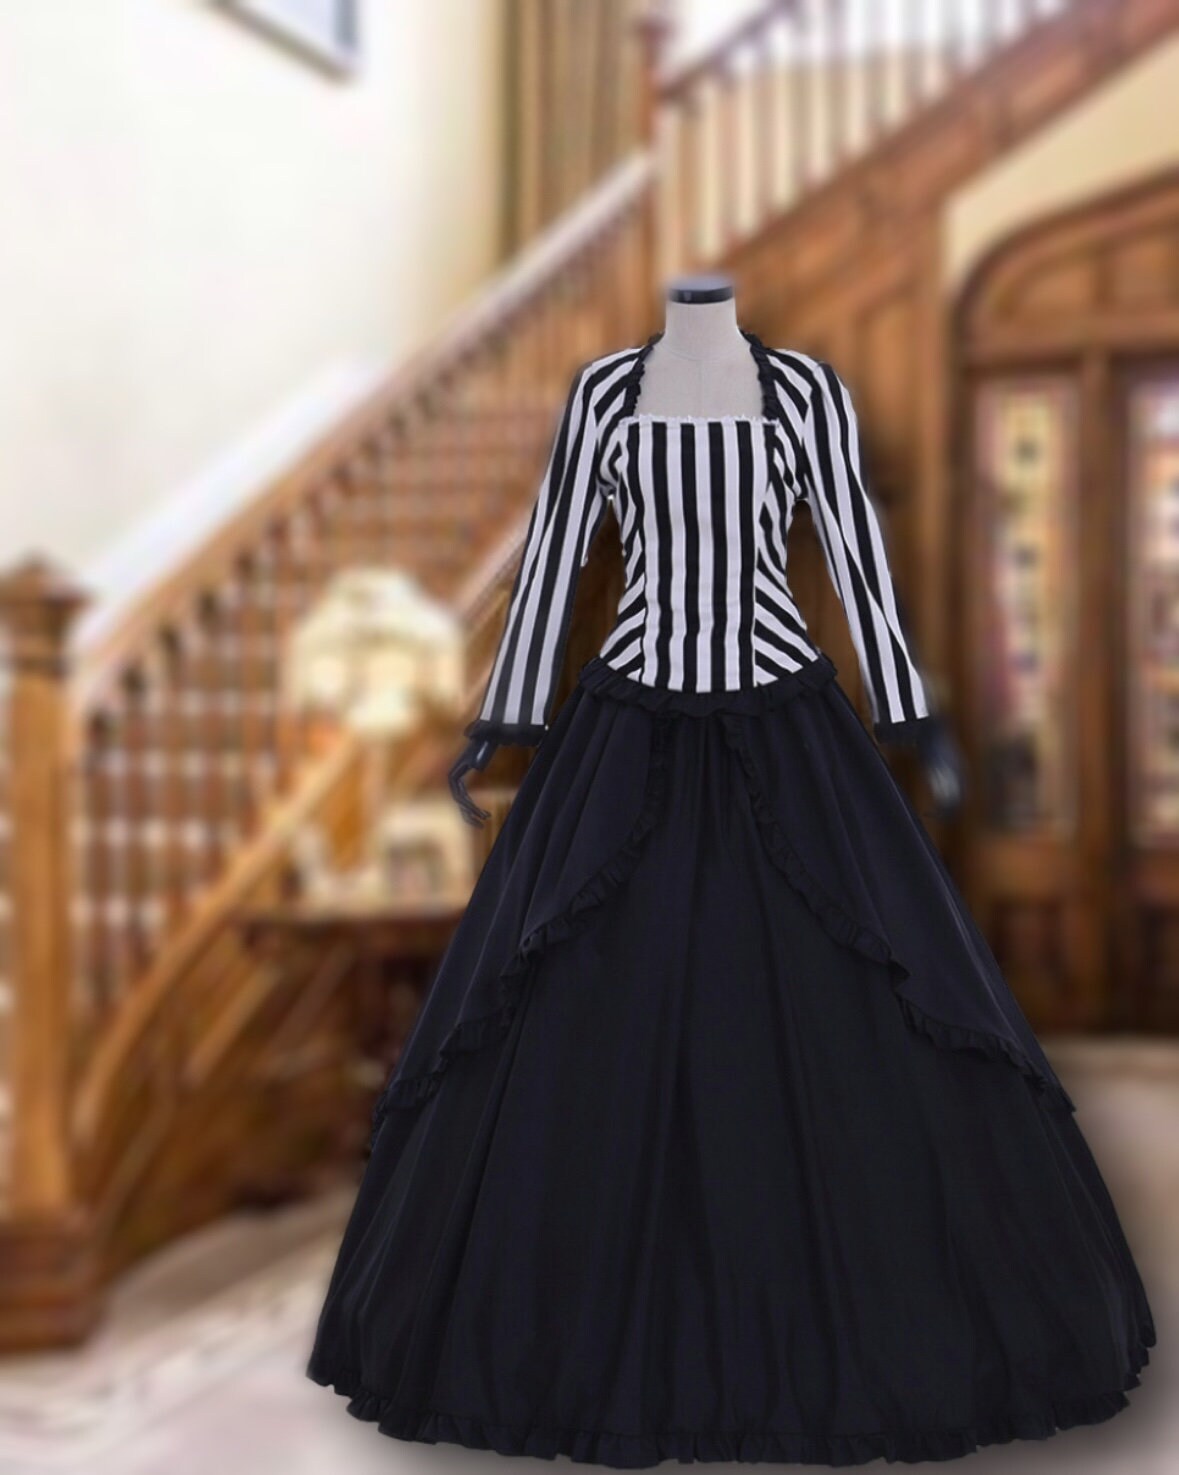 
                  
                    Victorian  Costume, Victorian  Dress, Bustle dress, Adult Historic Costume, Victorian outfit, Theatre Dress, Striped Victorian dress - TwirlingDresses
                  
                